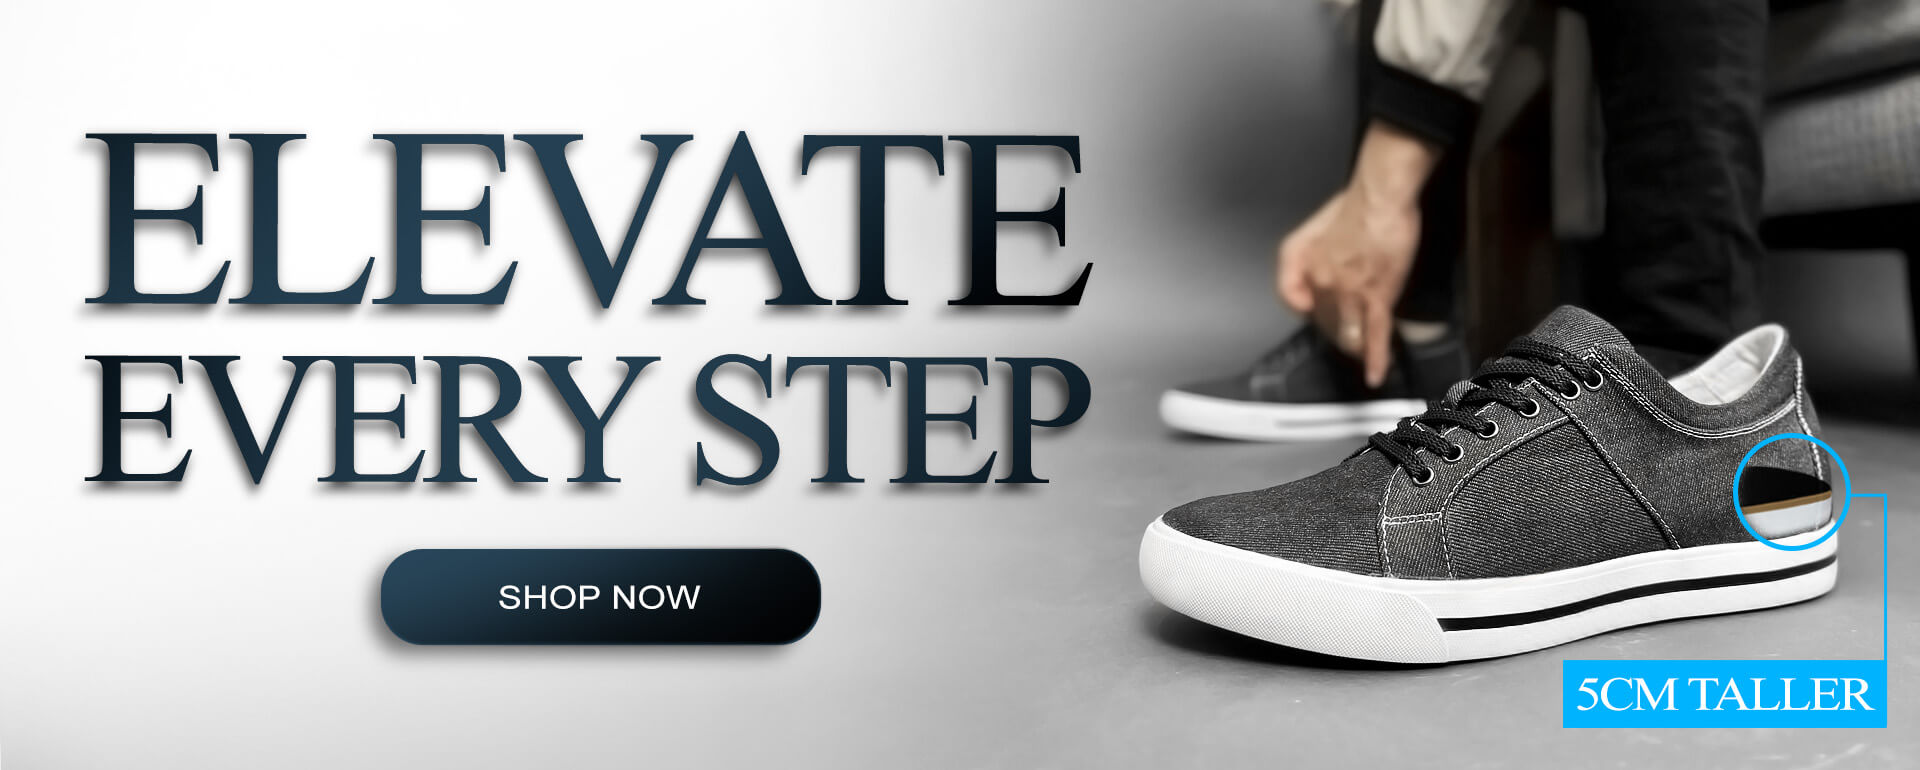 Elevate-Every-Step-JENNEN-Shoes-1